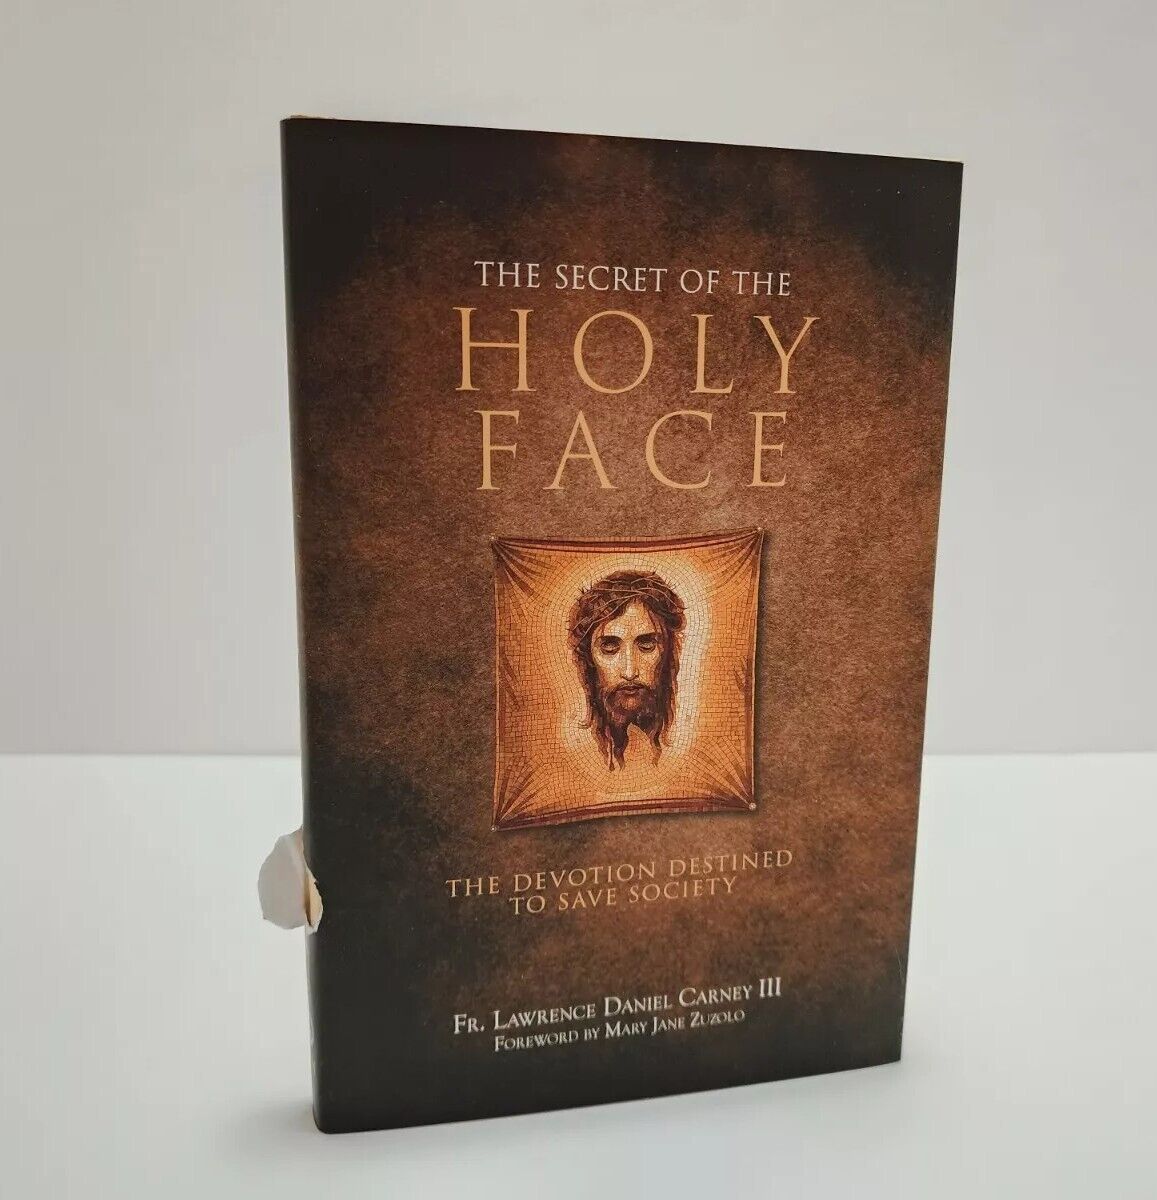 The Secret of the Holy Face : The Devotion Destined to Save Society *Read Below*